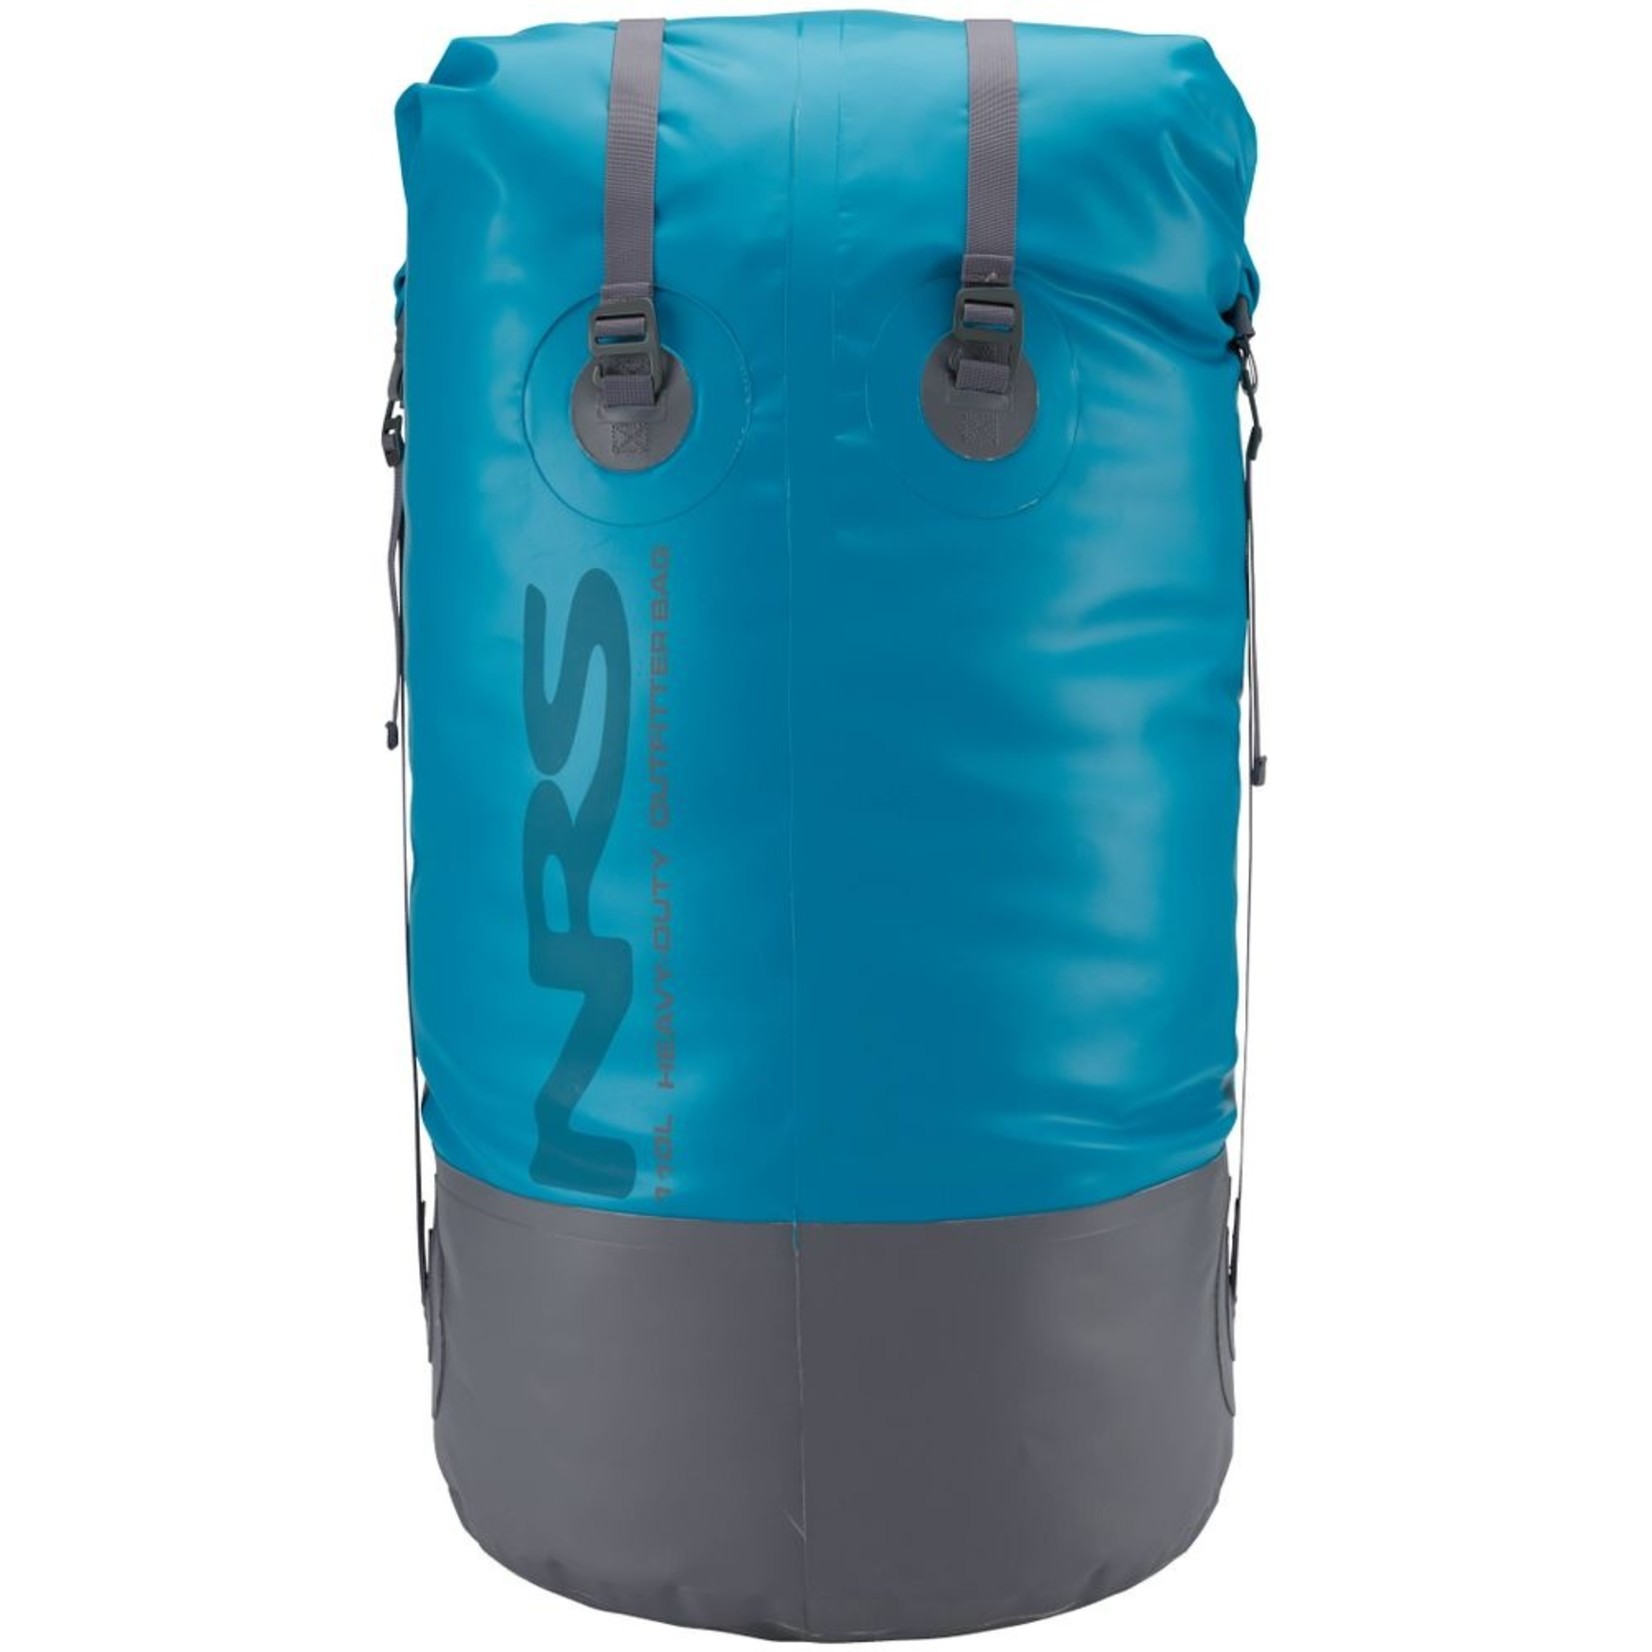 NRS NRS 110 L Heavy-Duty Outfitter Dry Bag